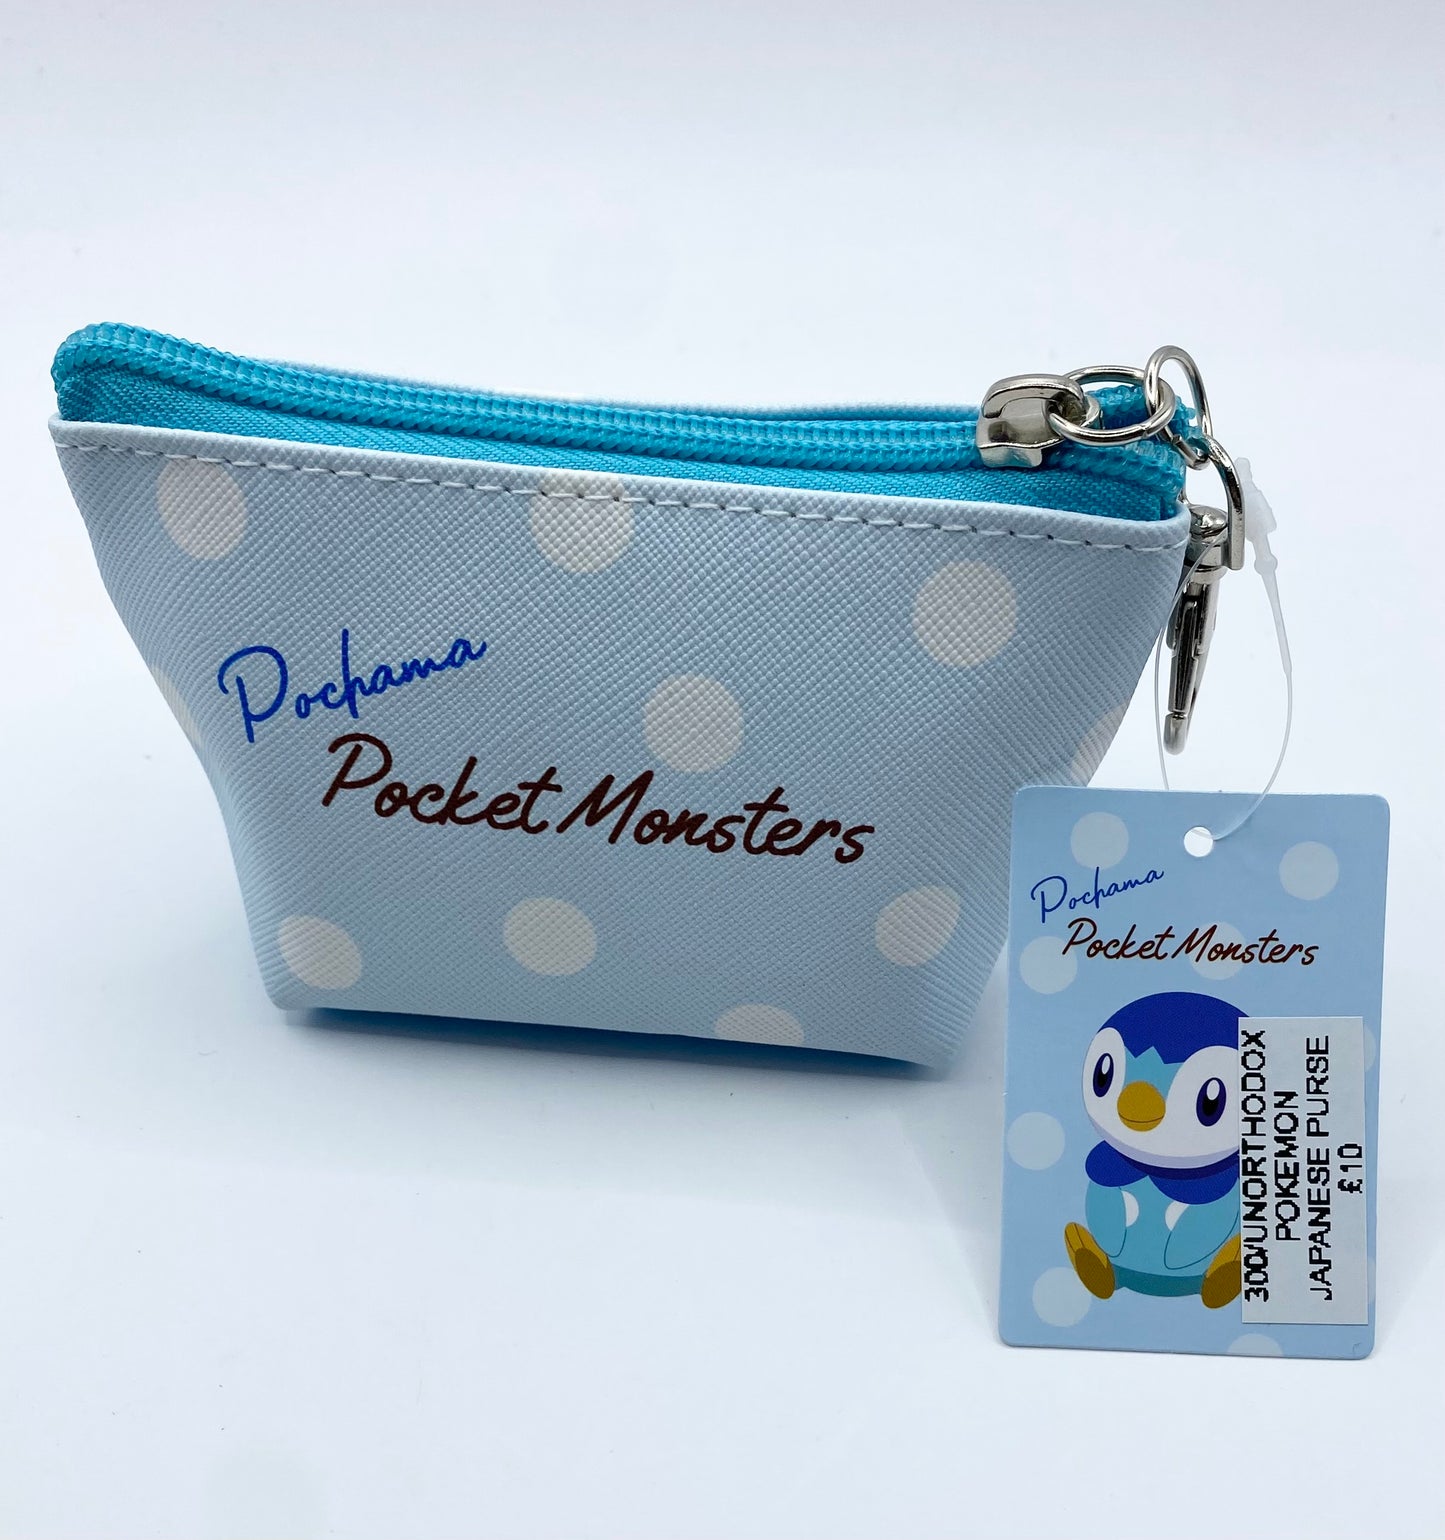 Pokemon Pocket Monsters Piplup Small Japanese Purse